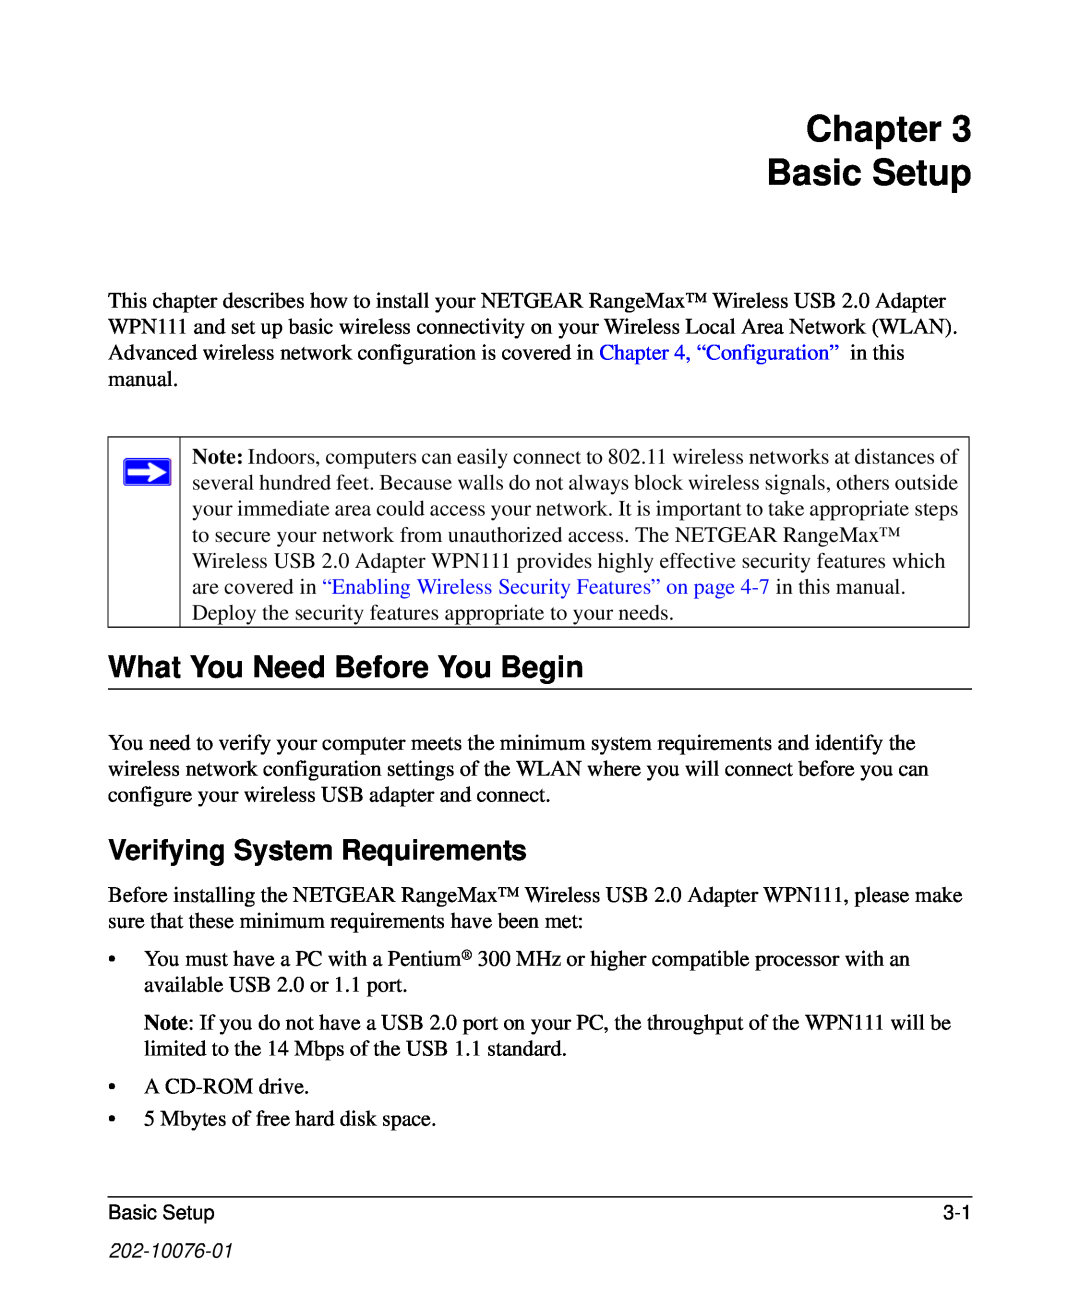 NETGEAR WPN111 user manual Chapter Basic Setup, What You Need Before You Begin, Verifying System Requirements 